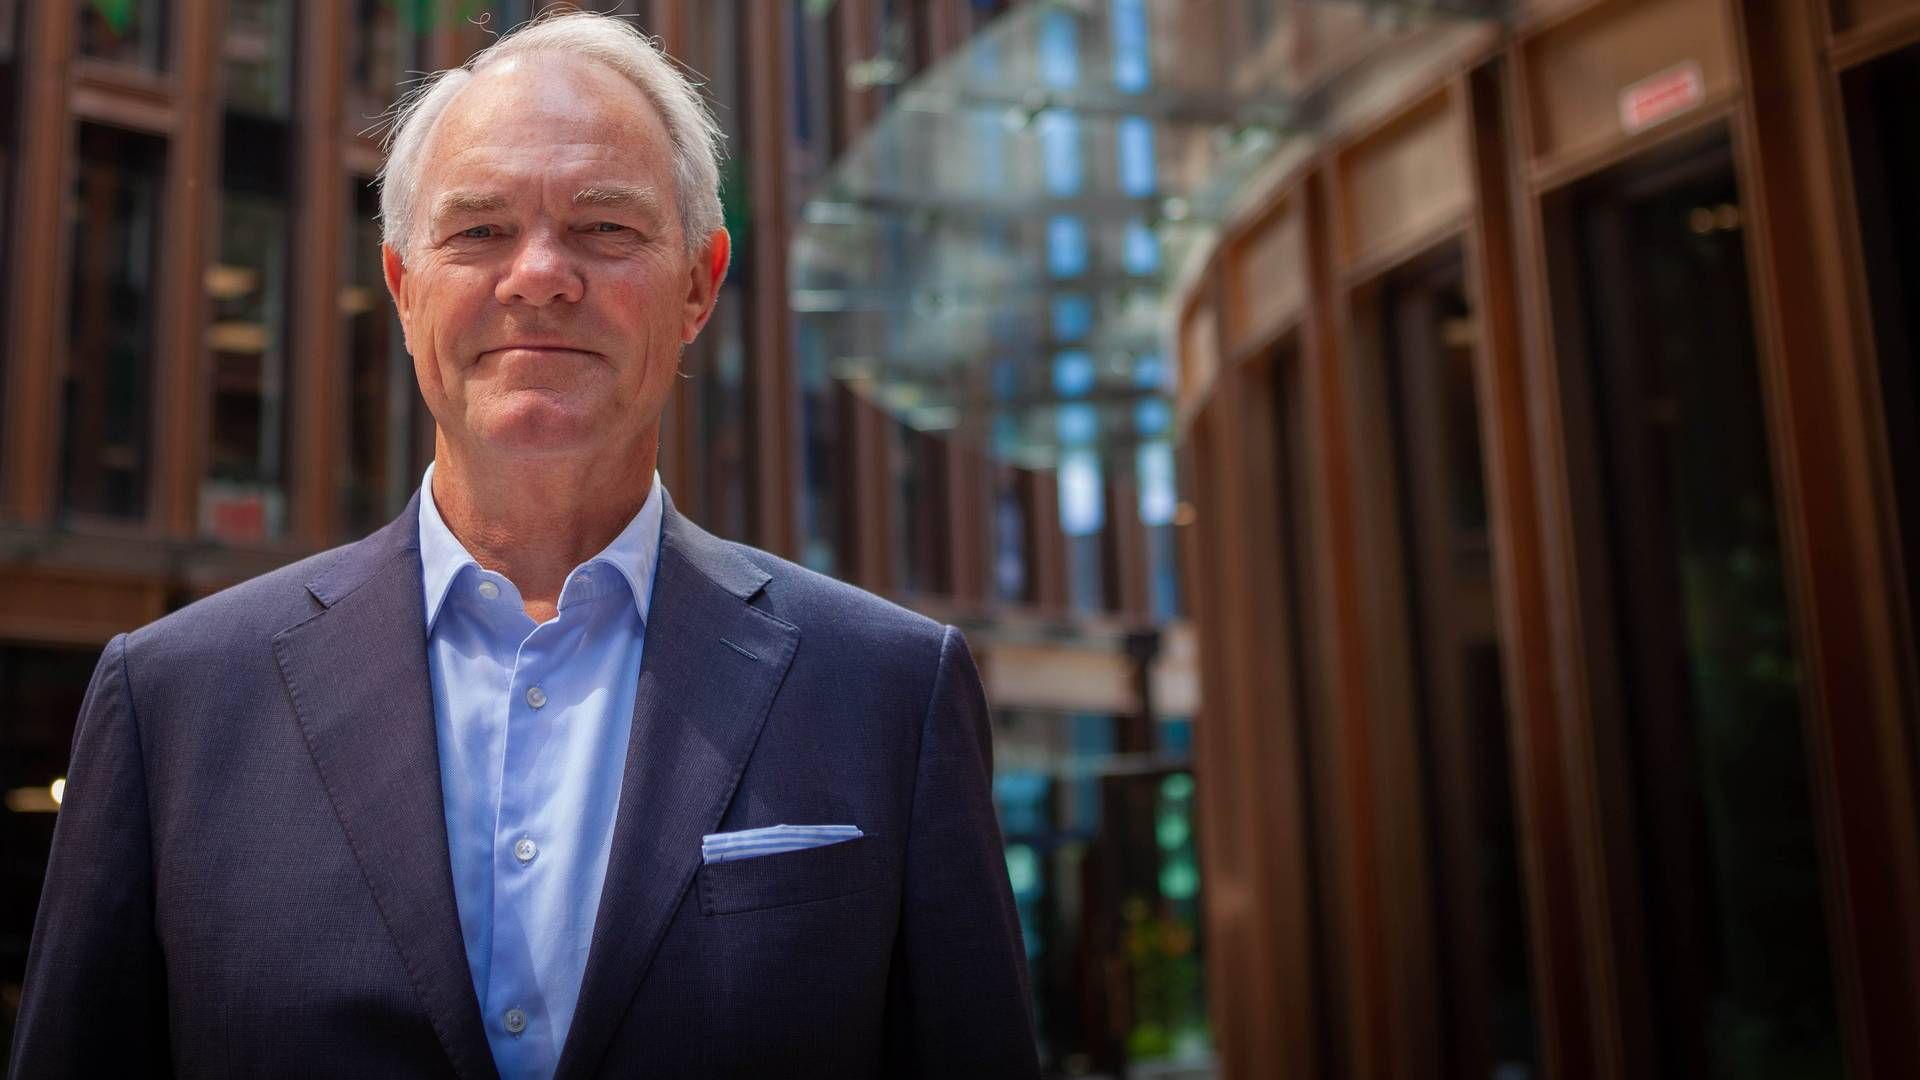 "The market has been much weaker than we predicted," says Storebrand AM's head of real estate, Truls Nergaard, about the last couple of years. | Photo: PR